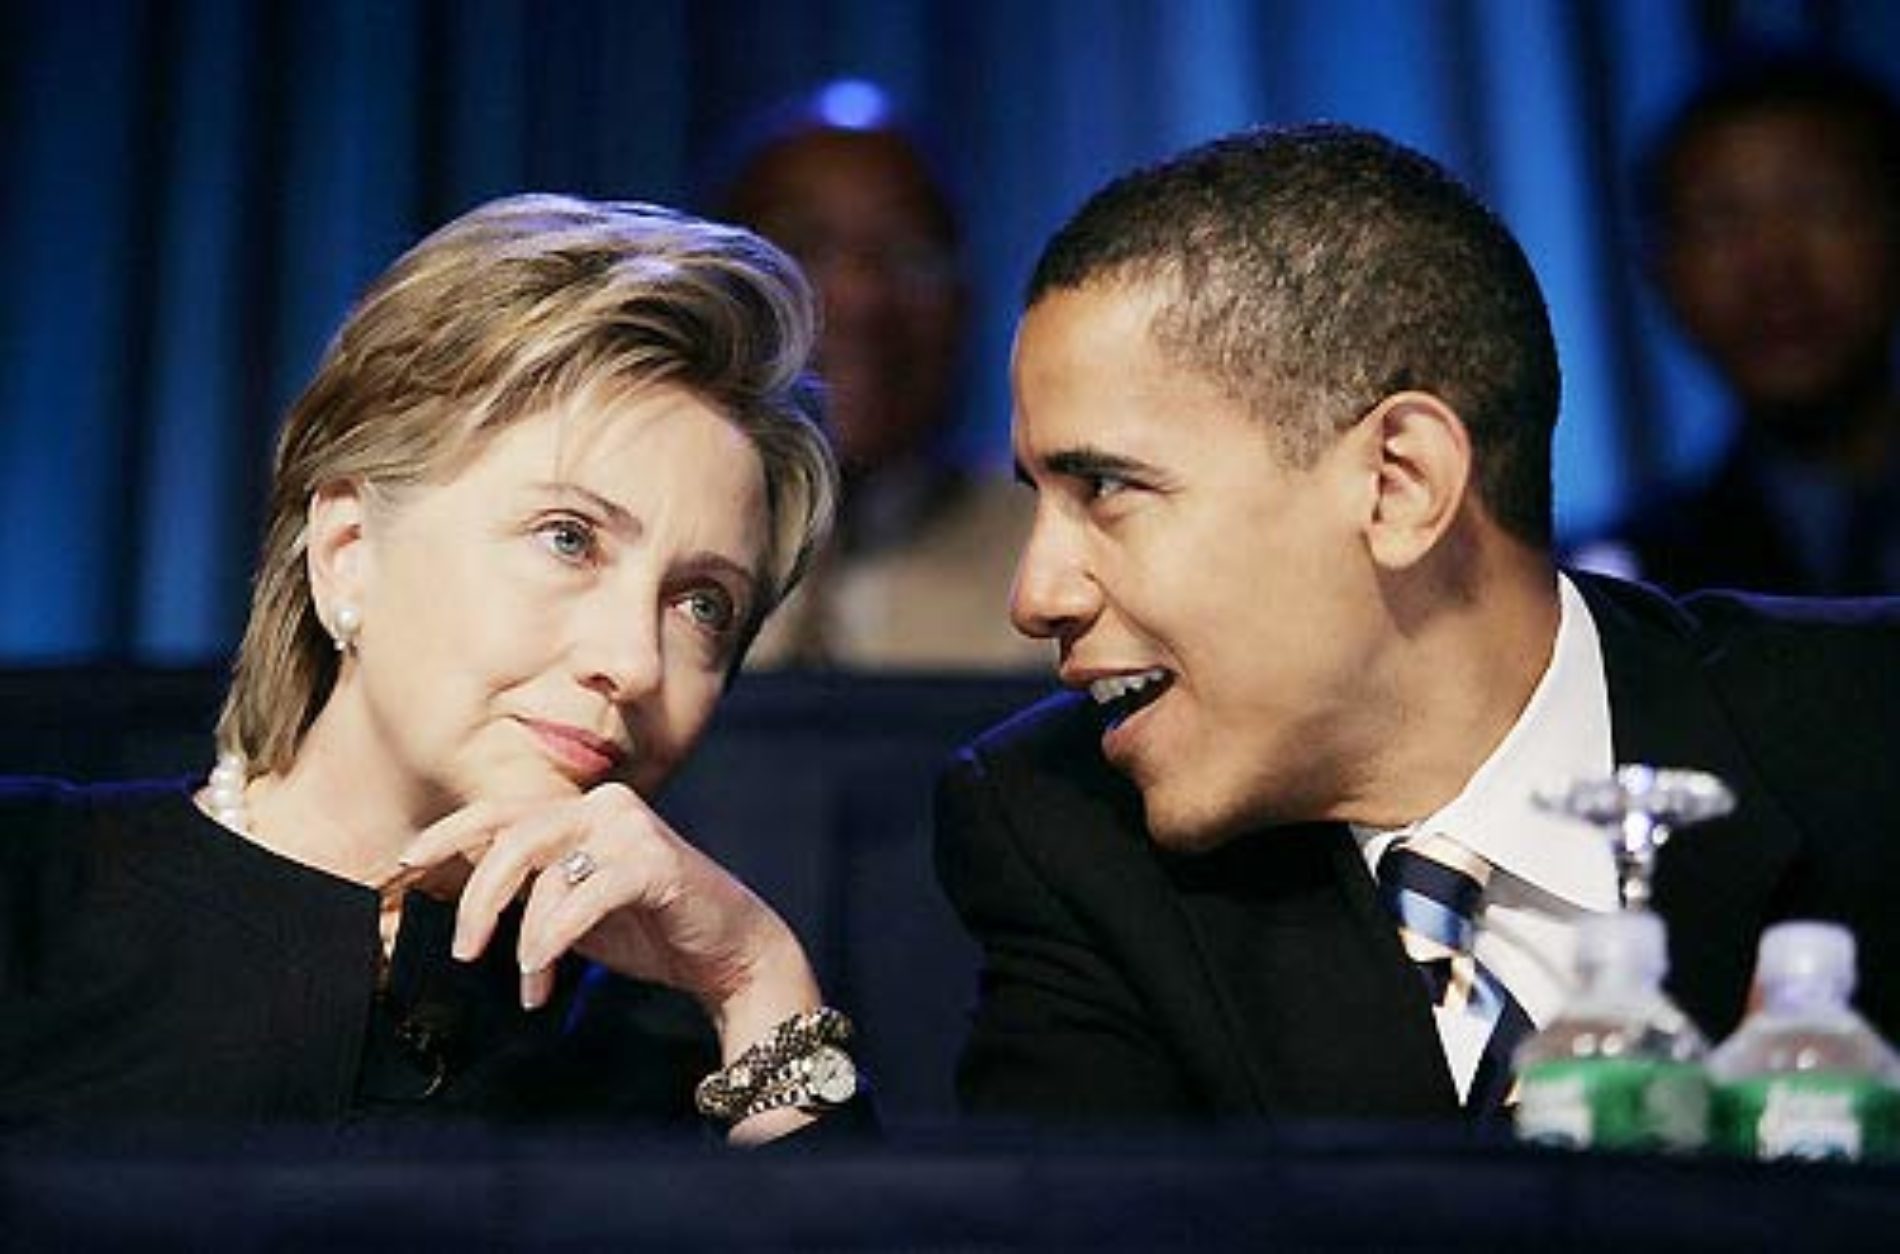 Emails reveal Hillary Clinton ‘pushed Obama administration’ to take on anti-gay laws in Africa